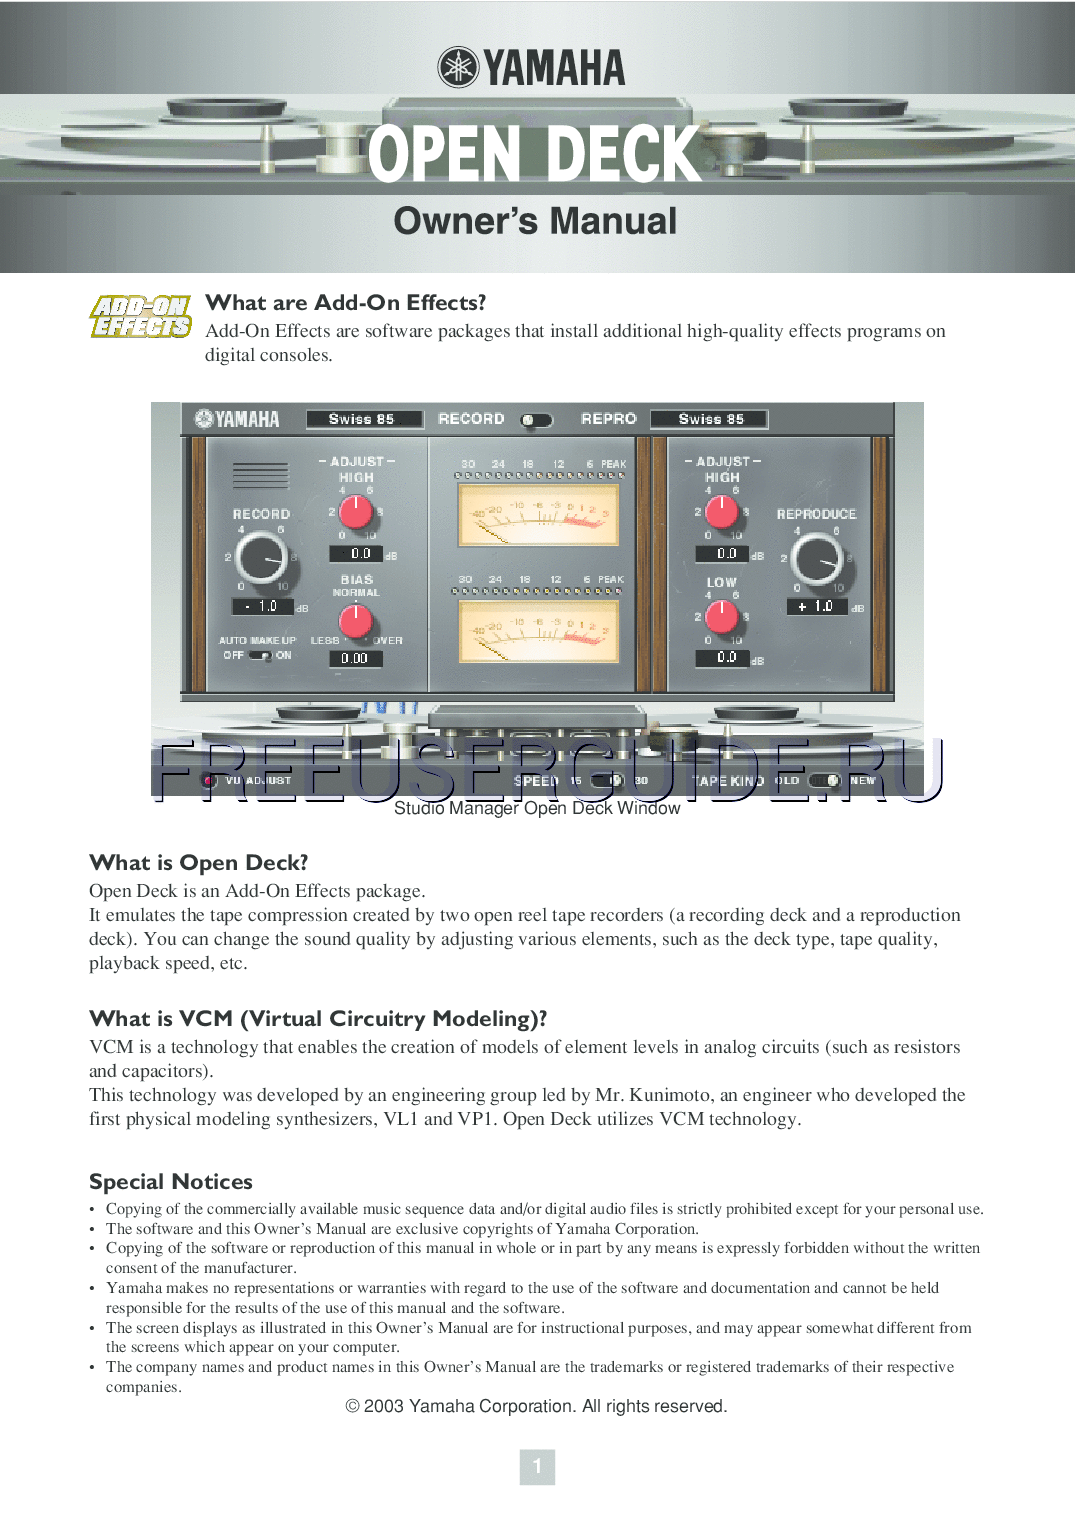 Read online Owner's Manual for Yamaha Add-On Effects (AE021) OpenDeck (Page 1)